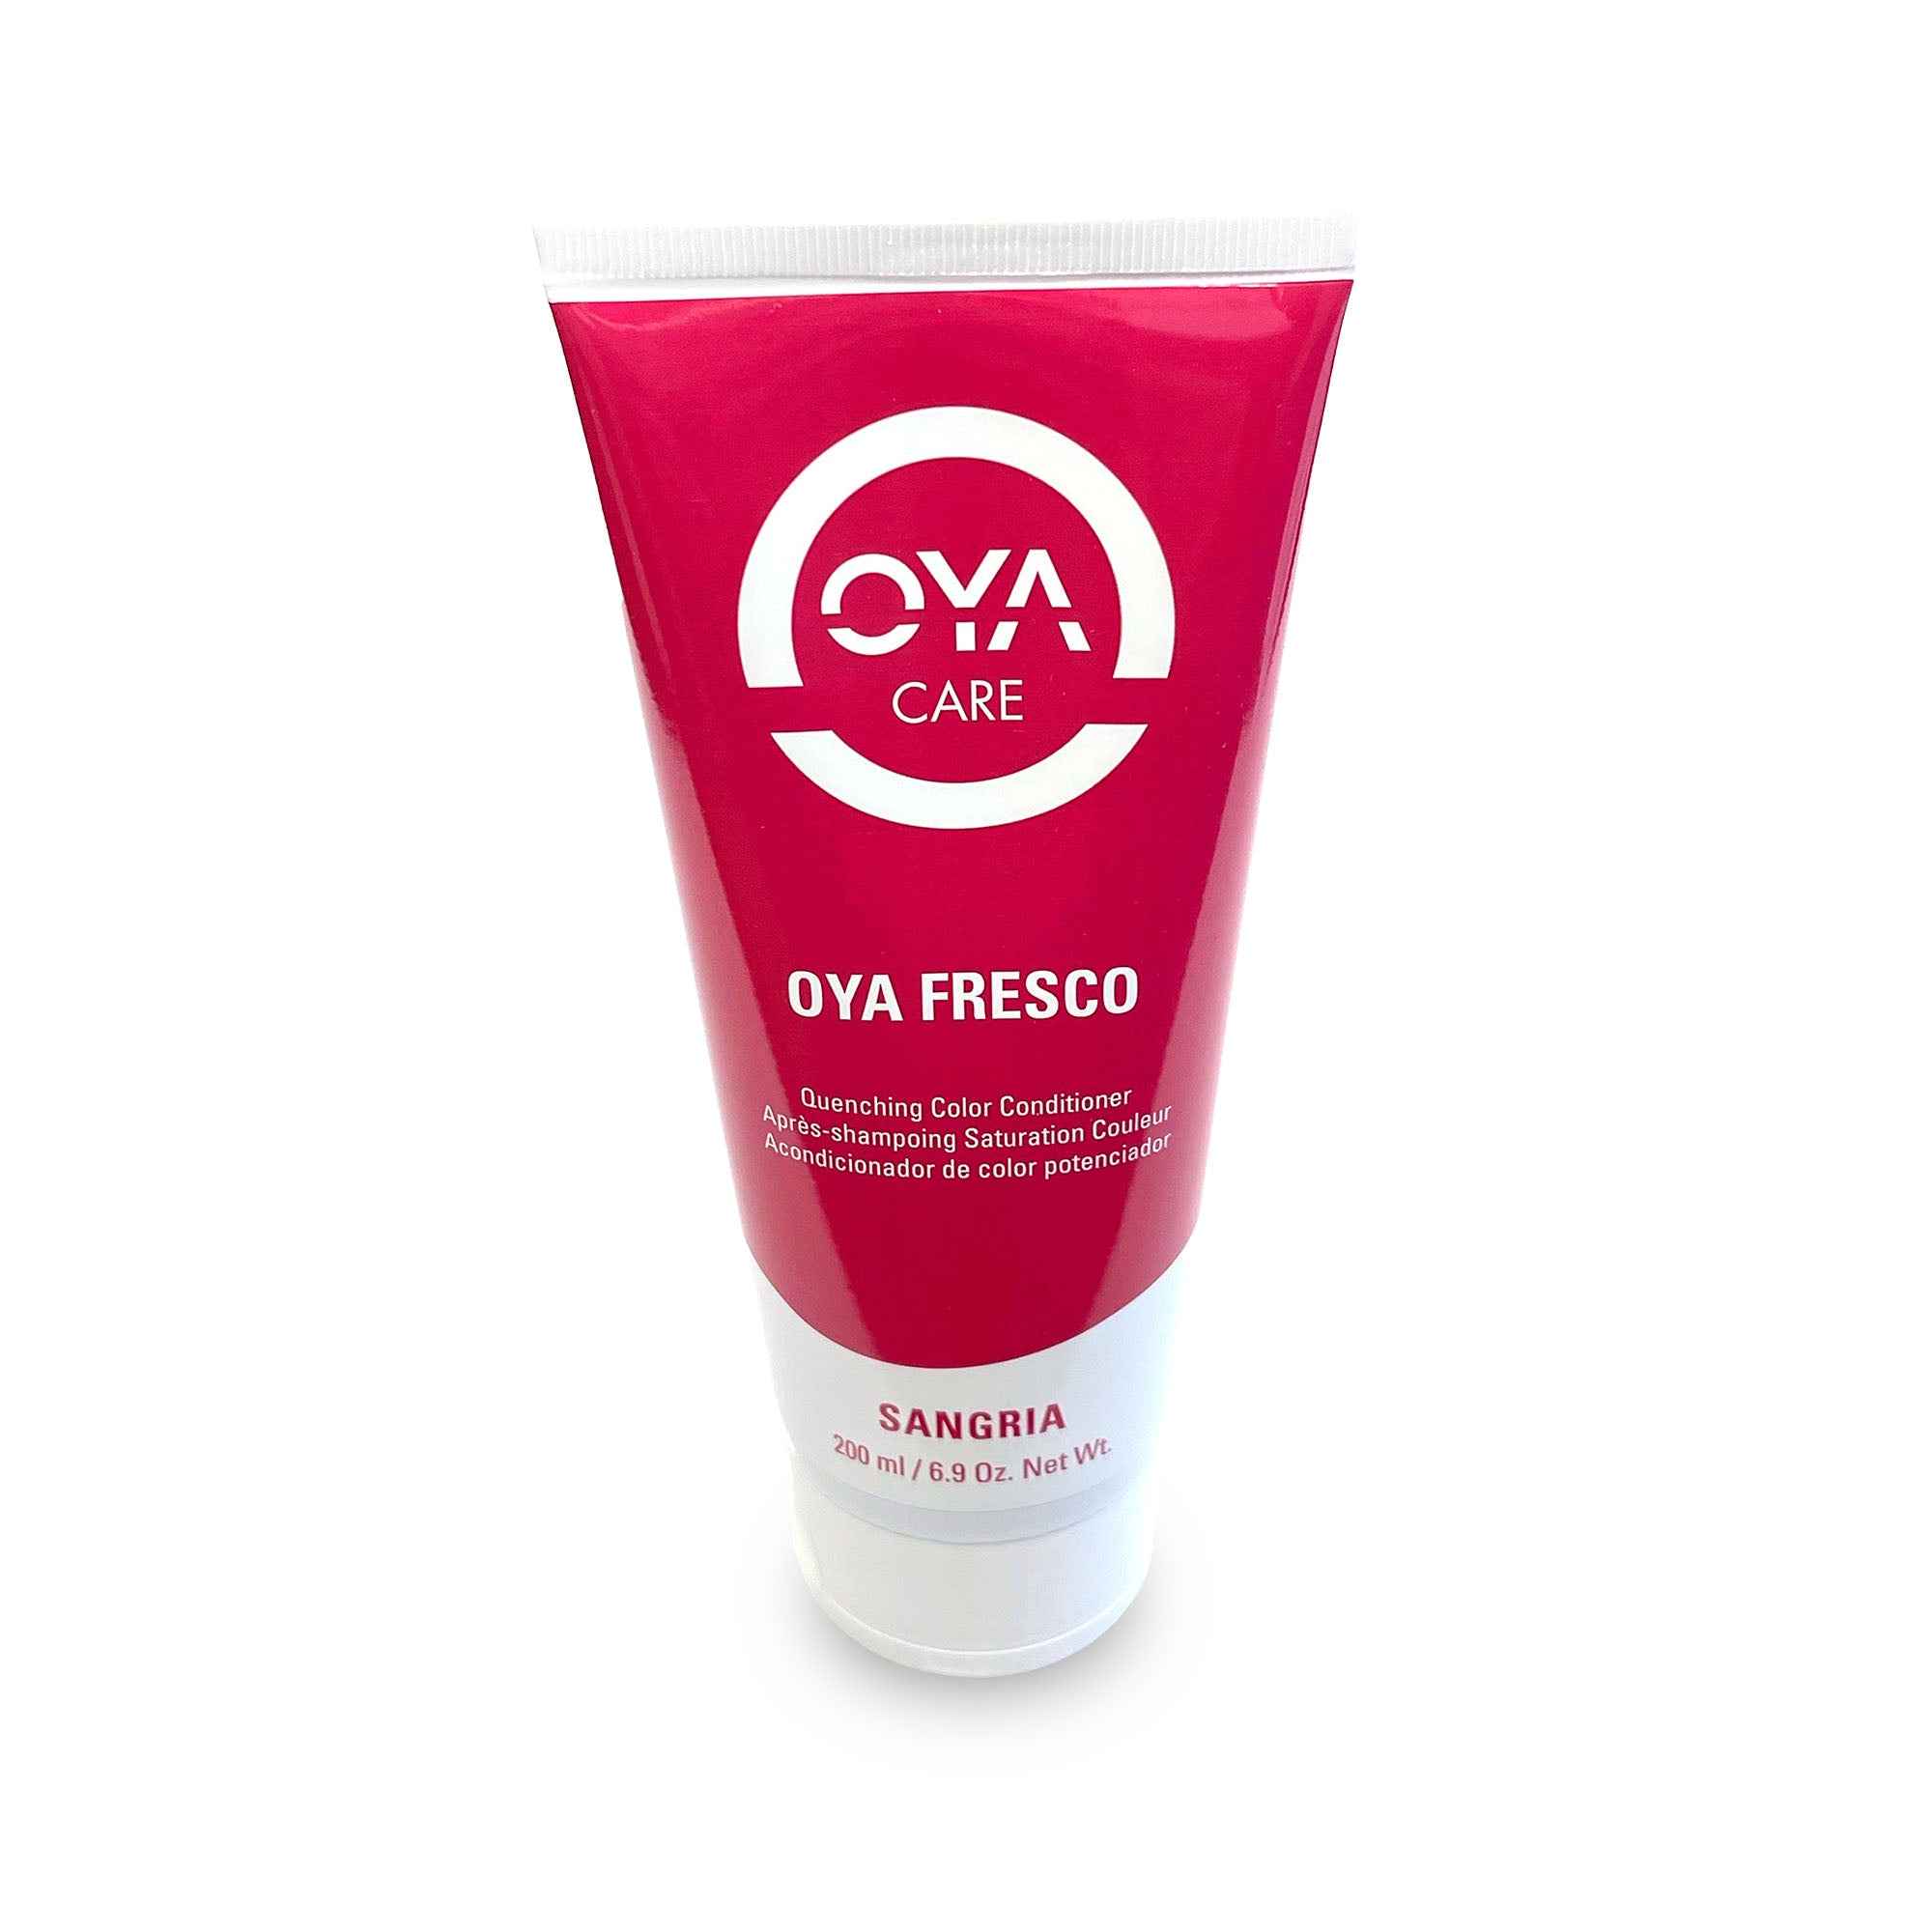 OYA Fresco Quenching Color Conditioner